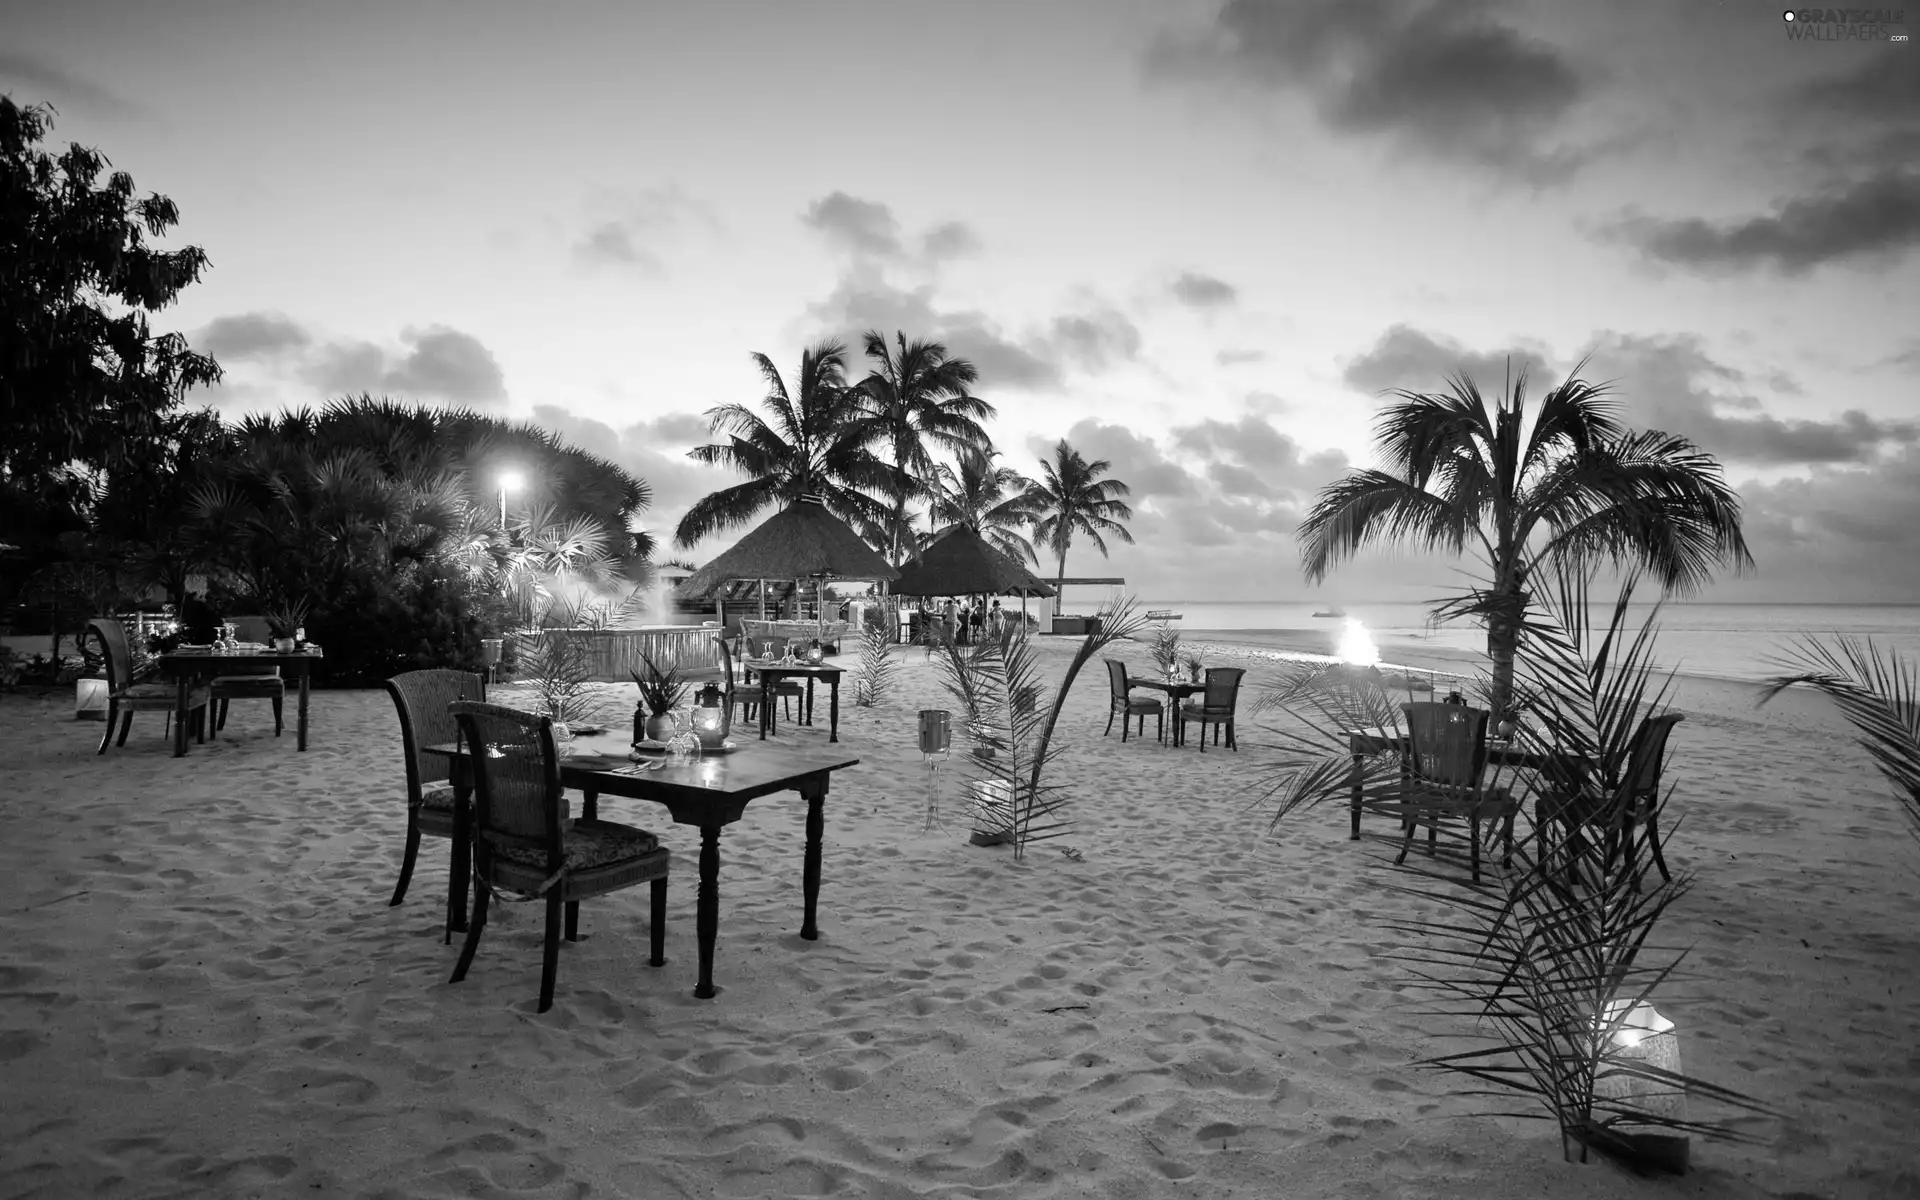 Houses, Palms, holiday, Tables, Tropical, sea, Beaches, Lanterns